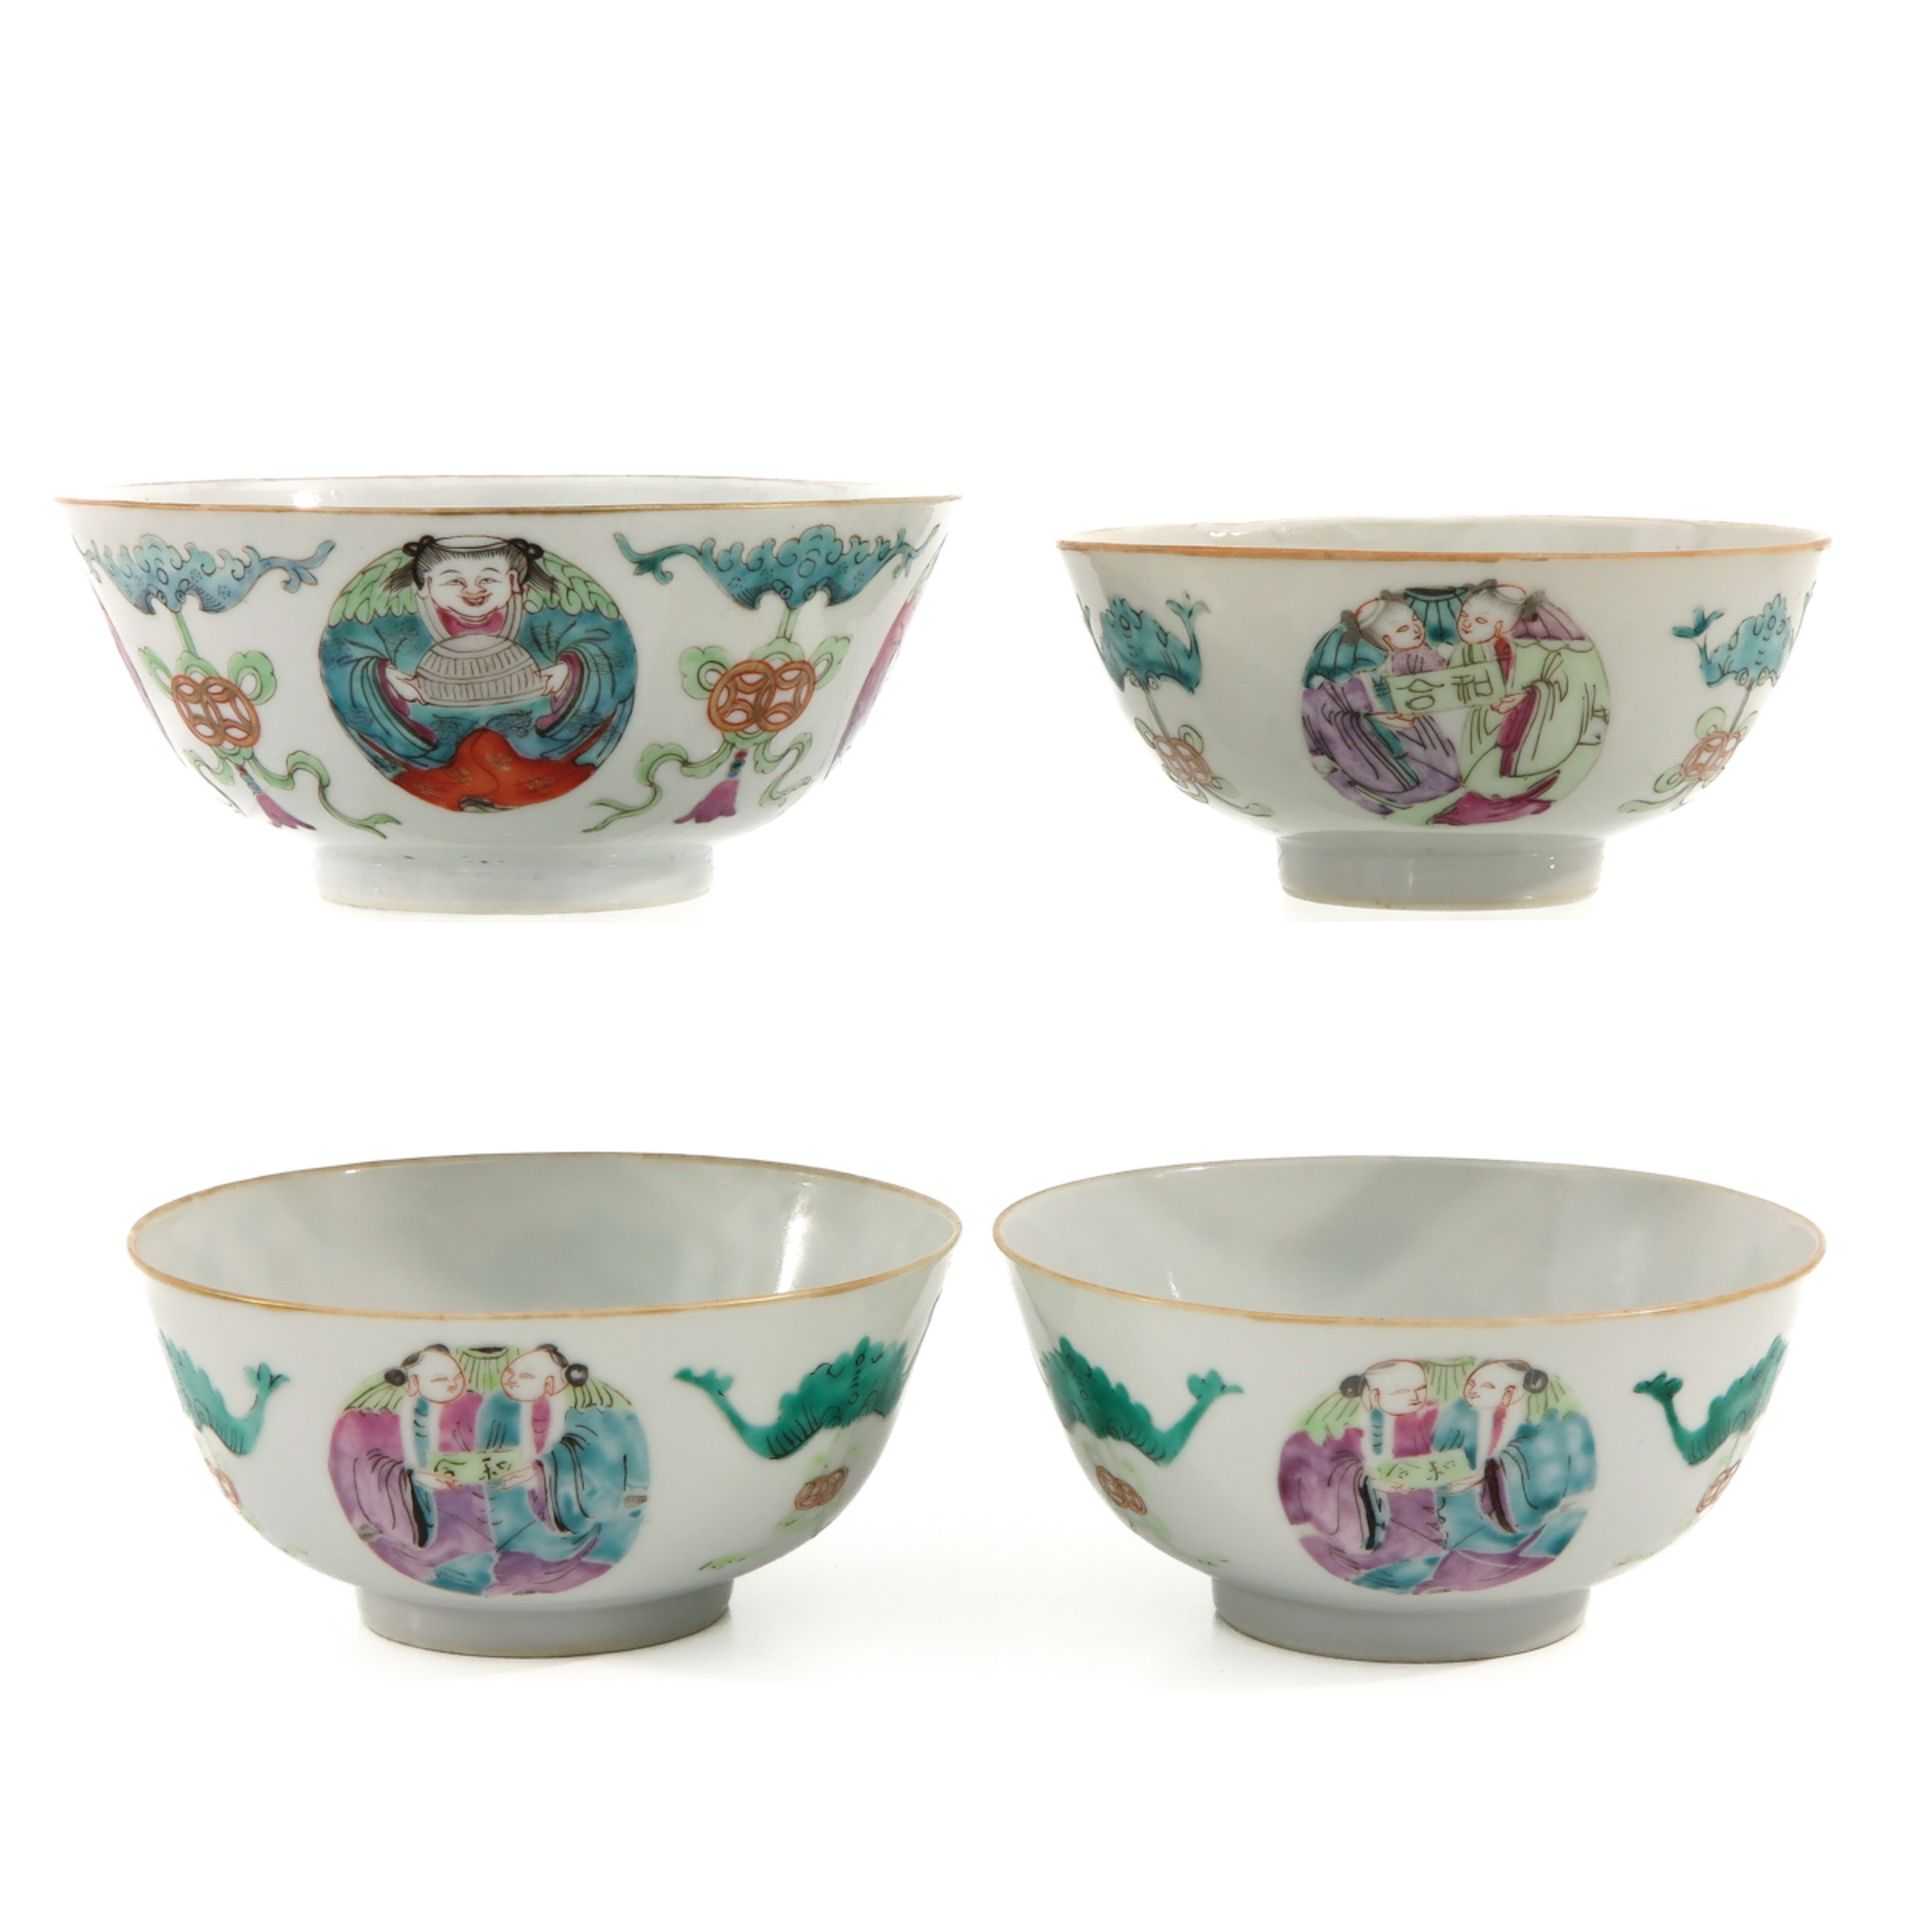 A Collection of 4 Famille Rose Bowls